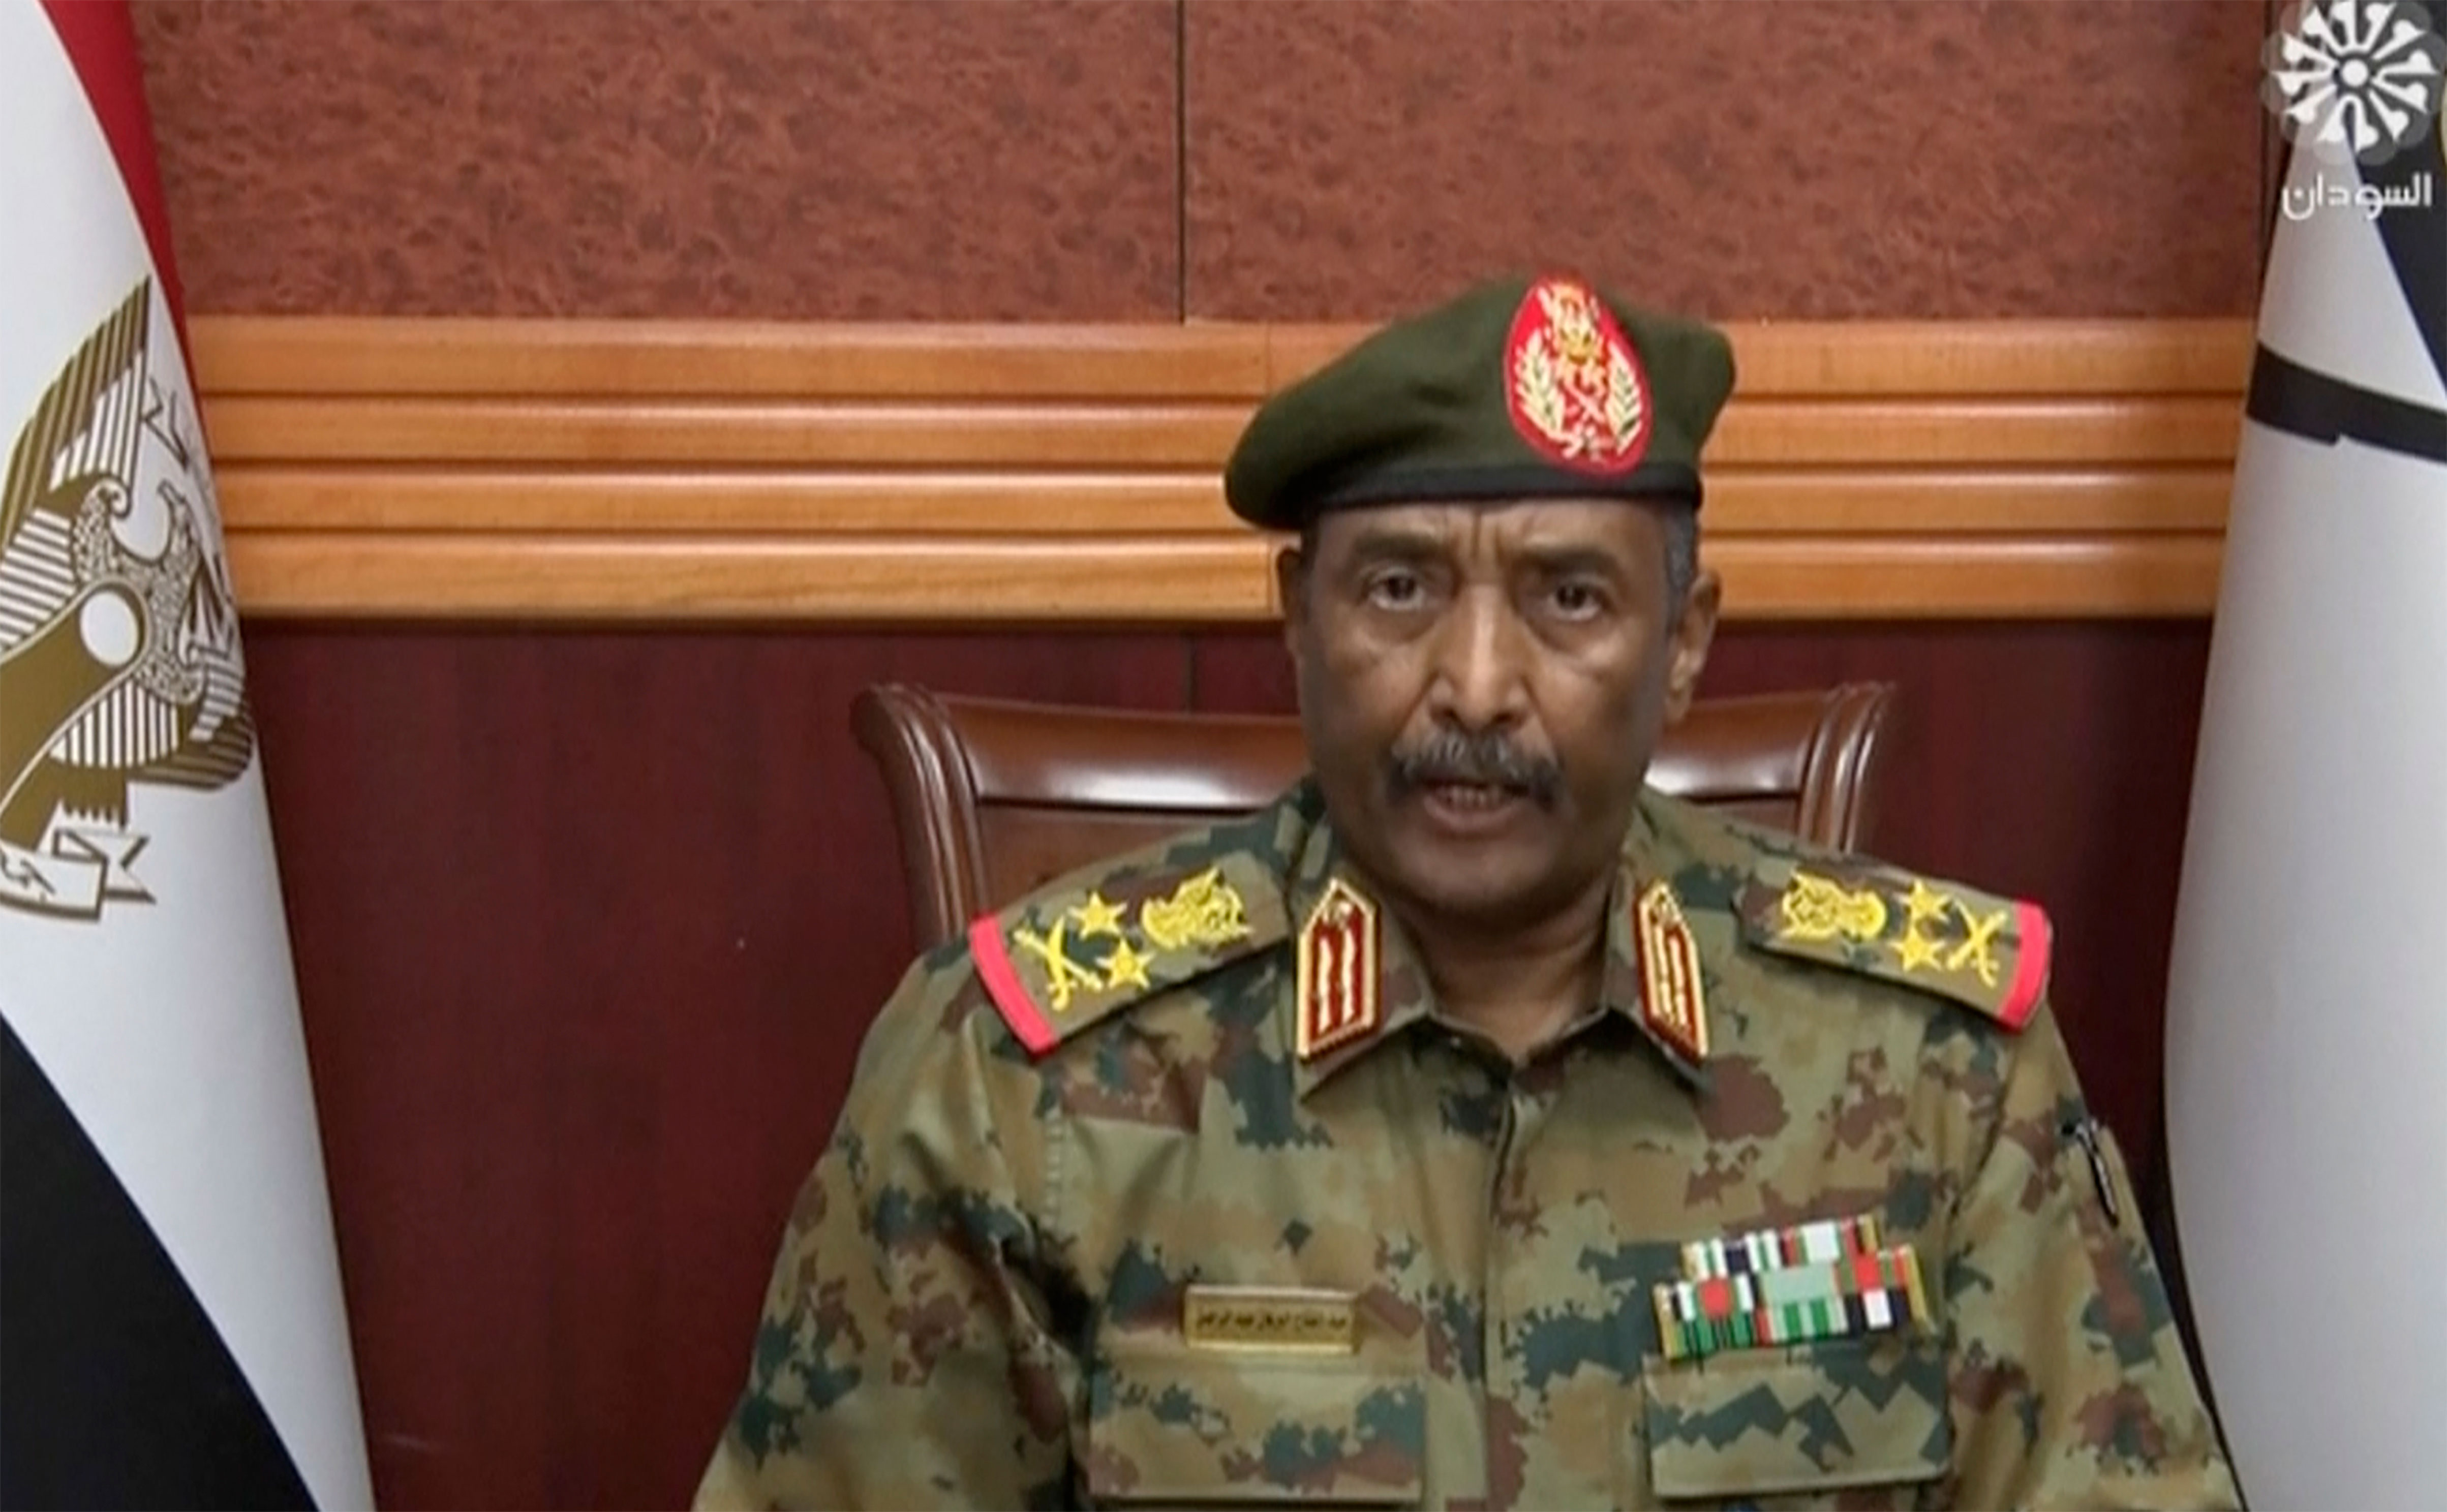 In this frame taken from video, Gen. Abdel Fattah al-Burhan, the head of Sudan's armed forces, speaks during a televised address in Khartoum, Sudan, on October 25.